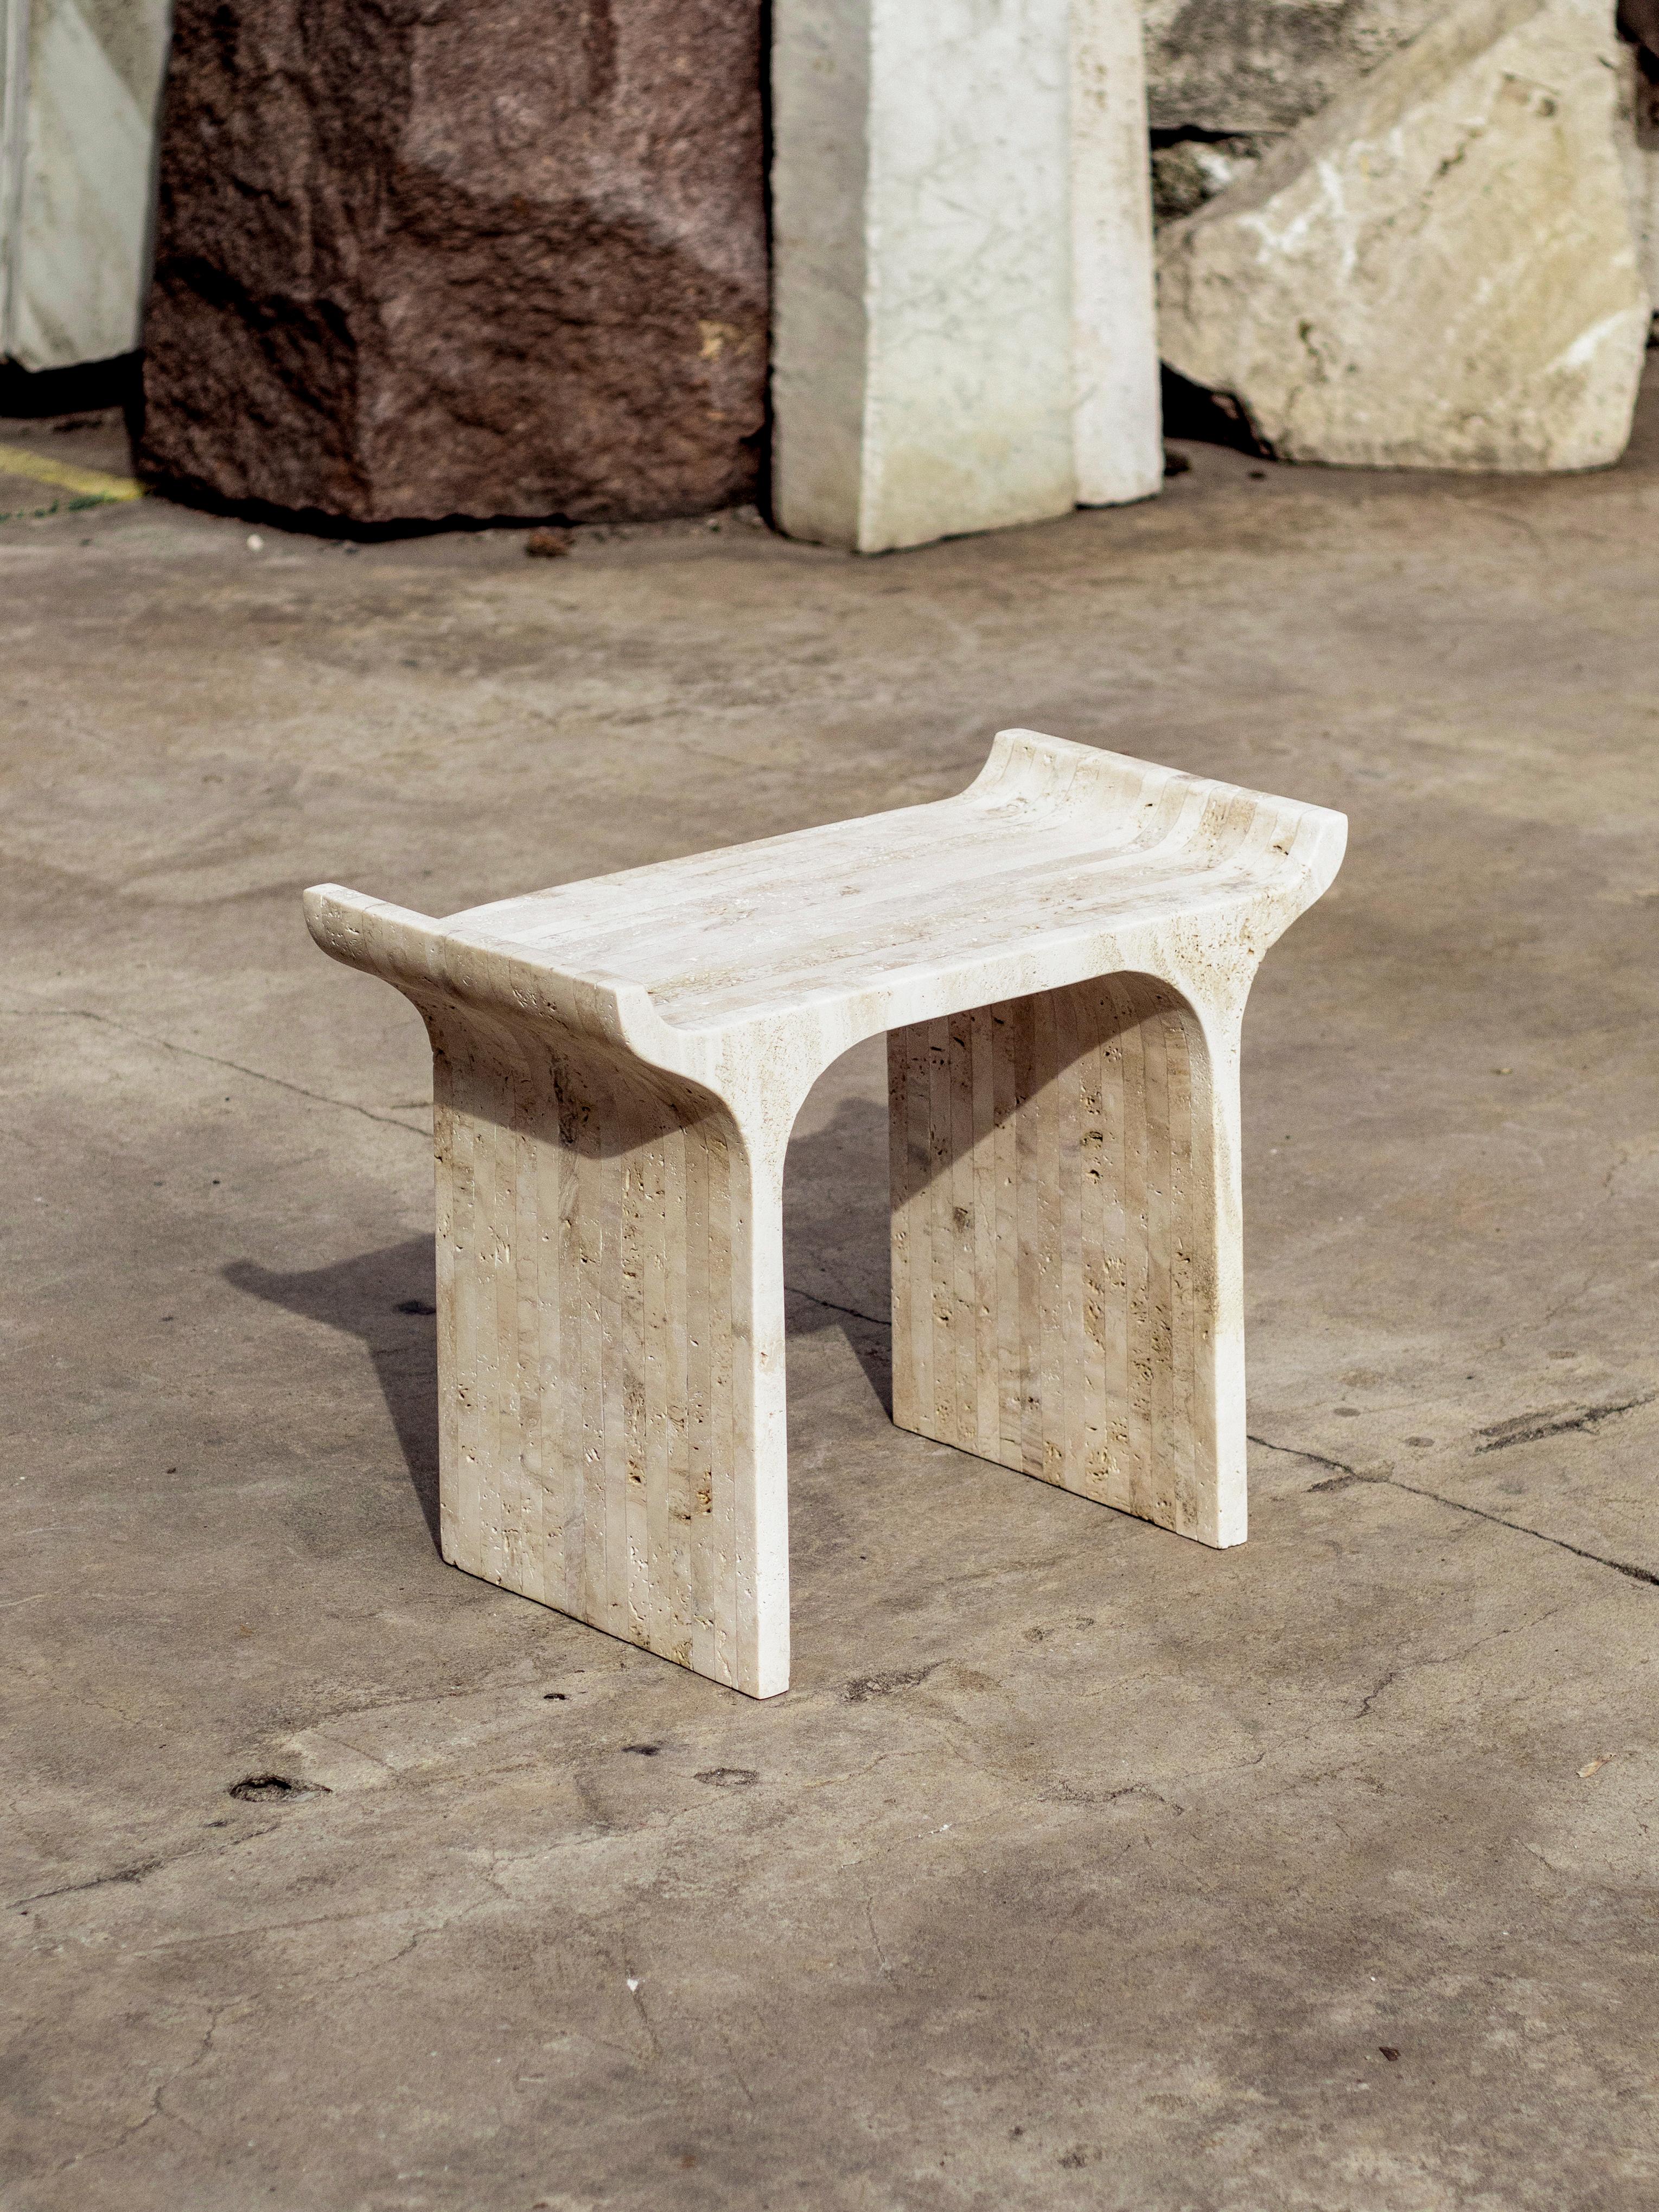 Other Tori Stool Travertine by Ries